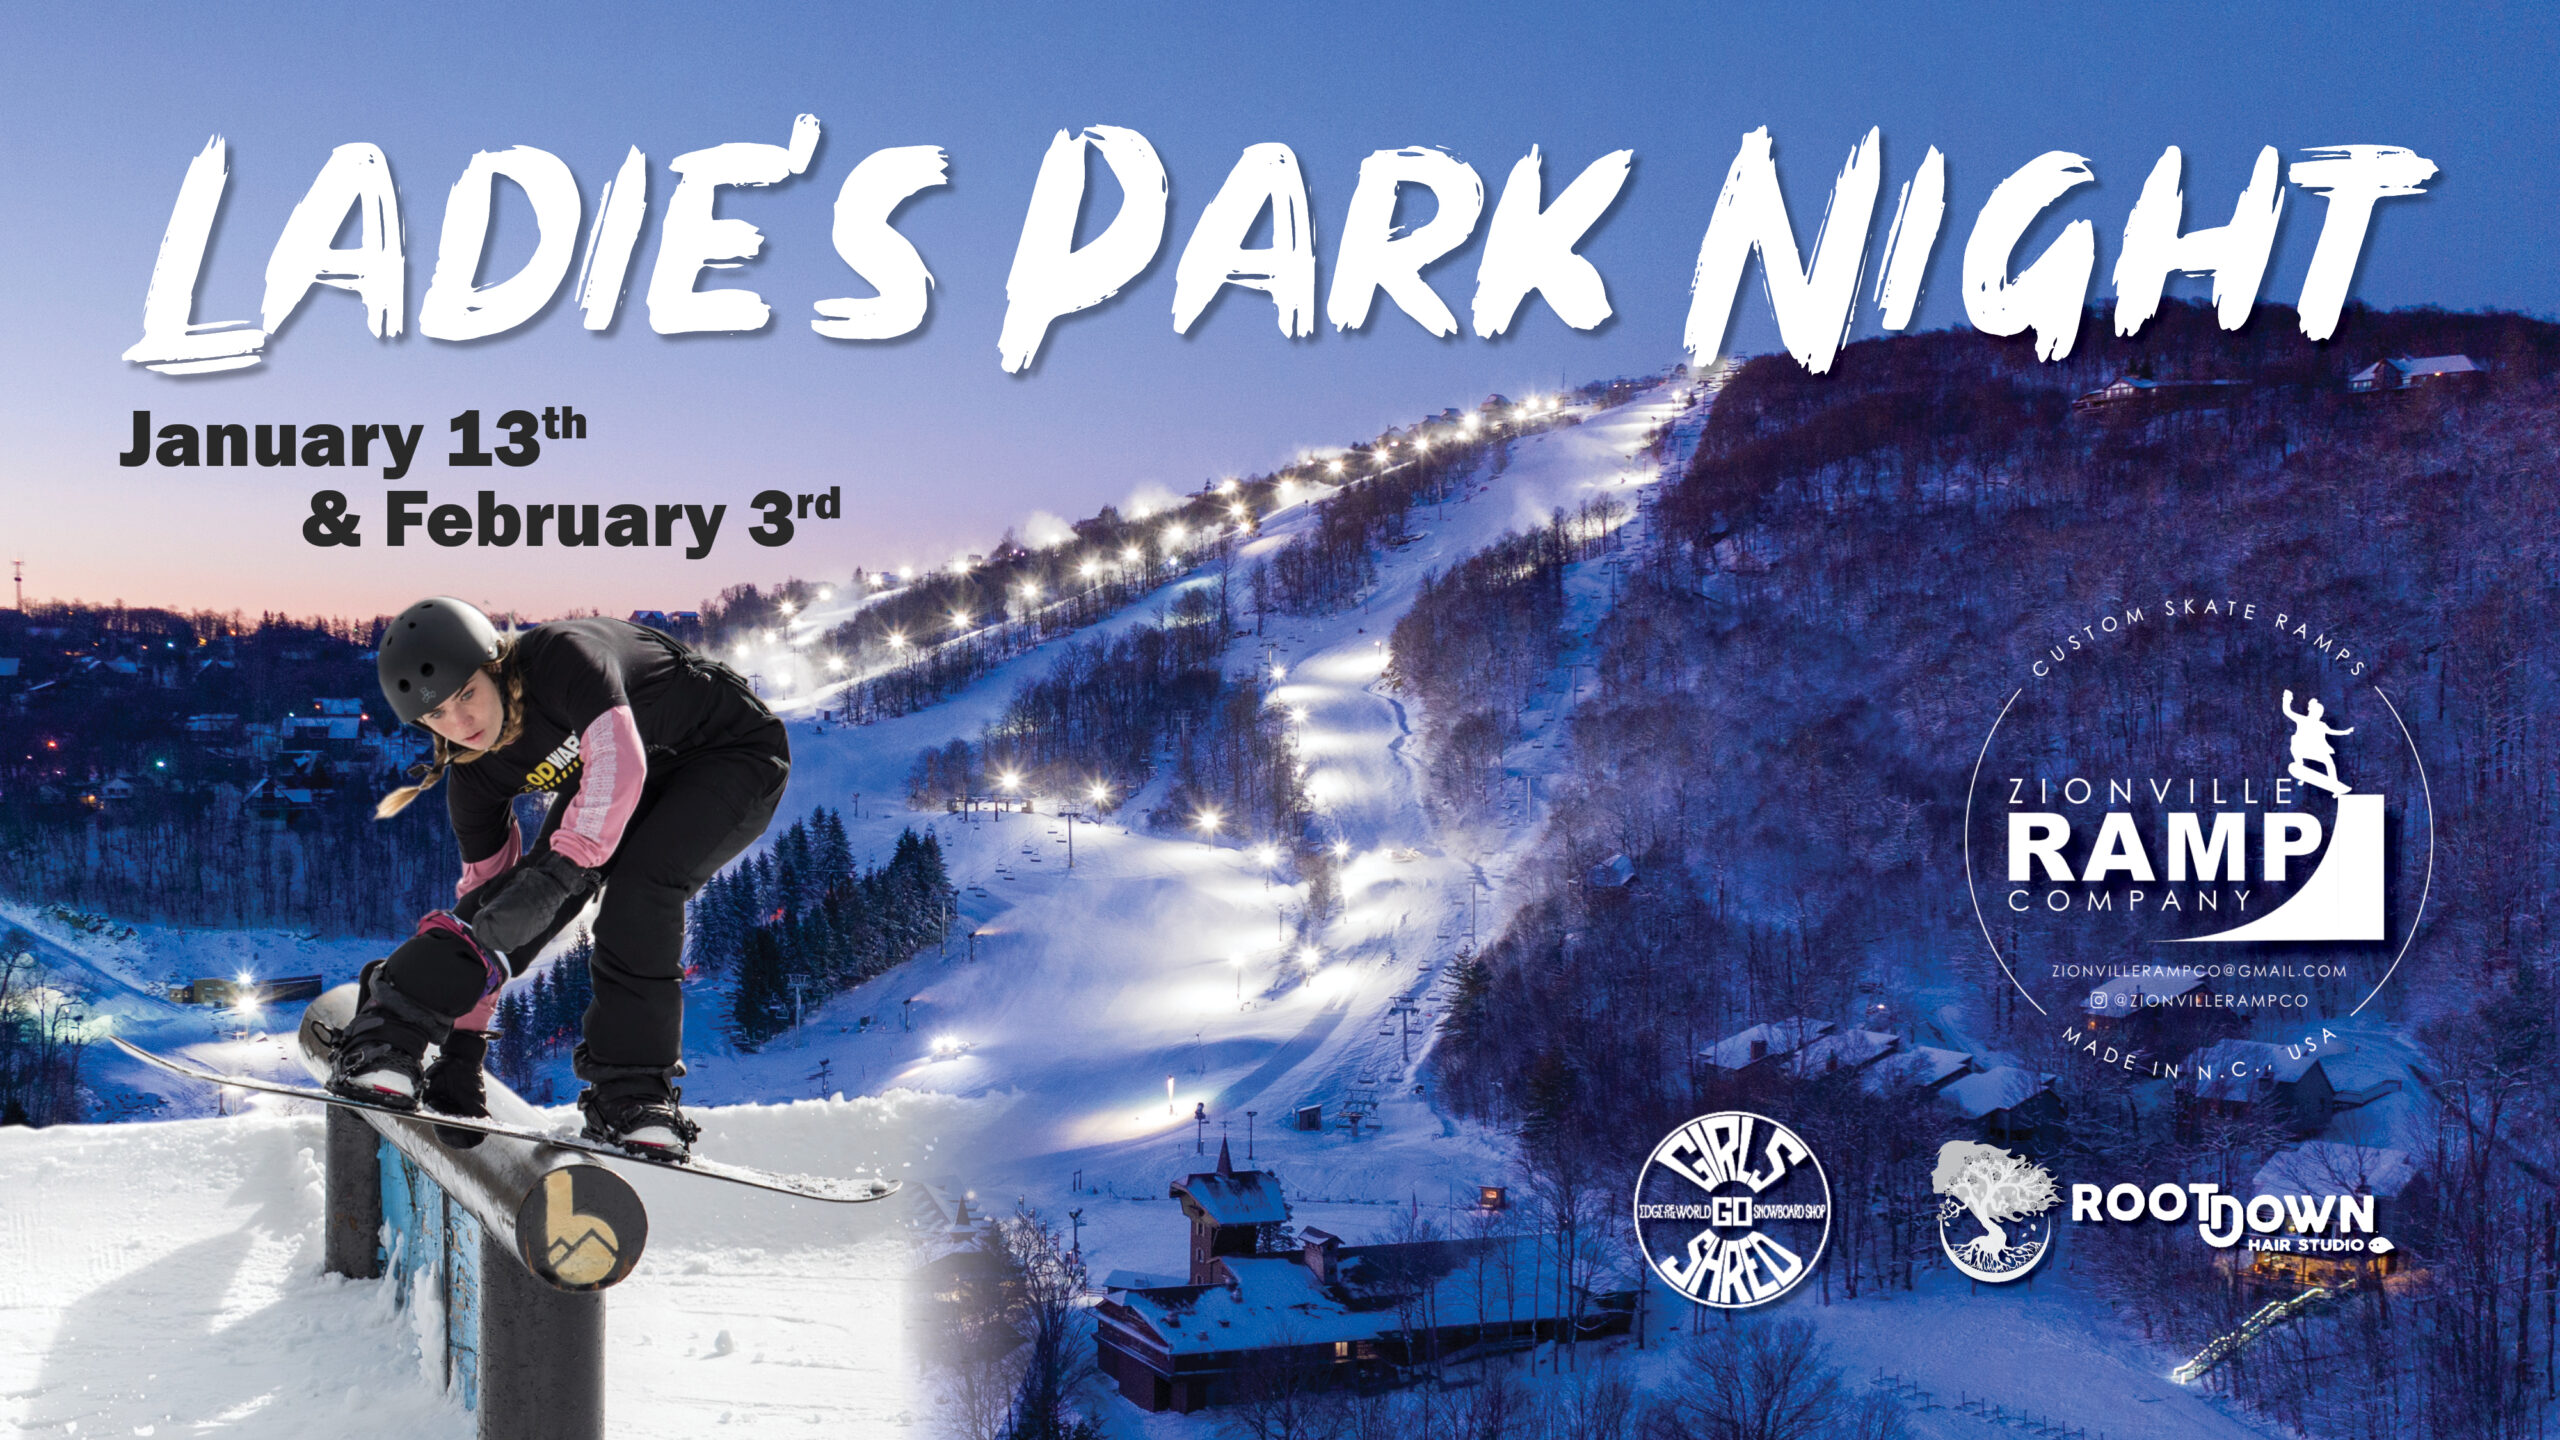 Ladies Park Night poster for January 13th and February 3rd